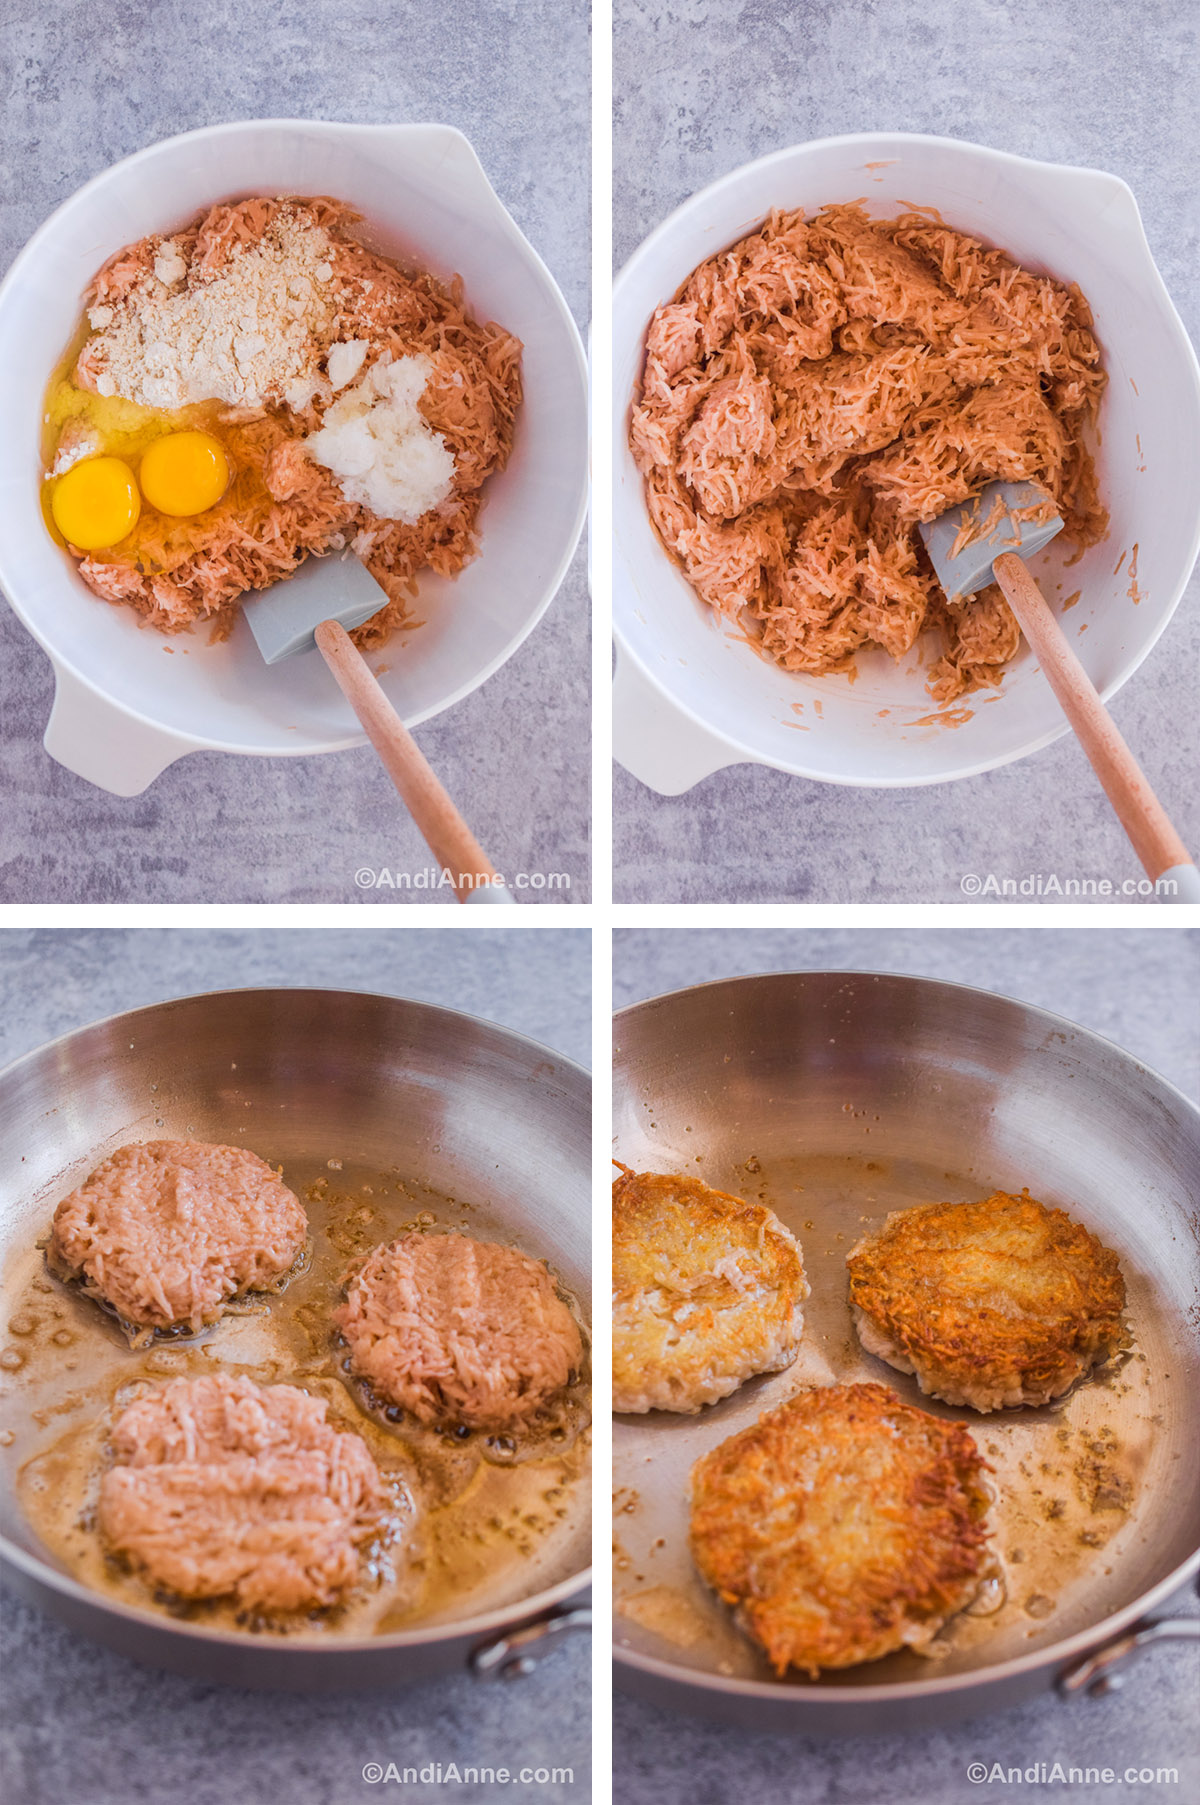 Four images showing various steps to make the recipe. A white bowl before and after all ingredients are dumped in and mixed. A frying pan with raw pancake patties and then golden brown patties.